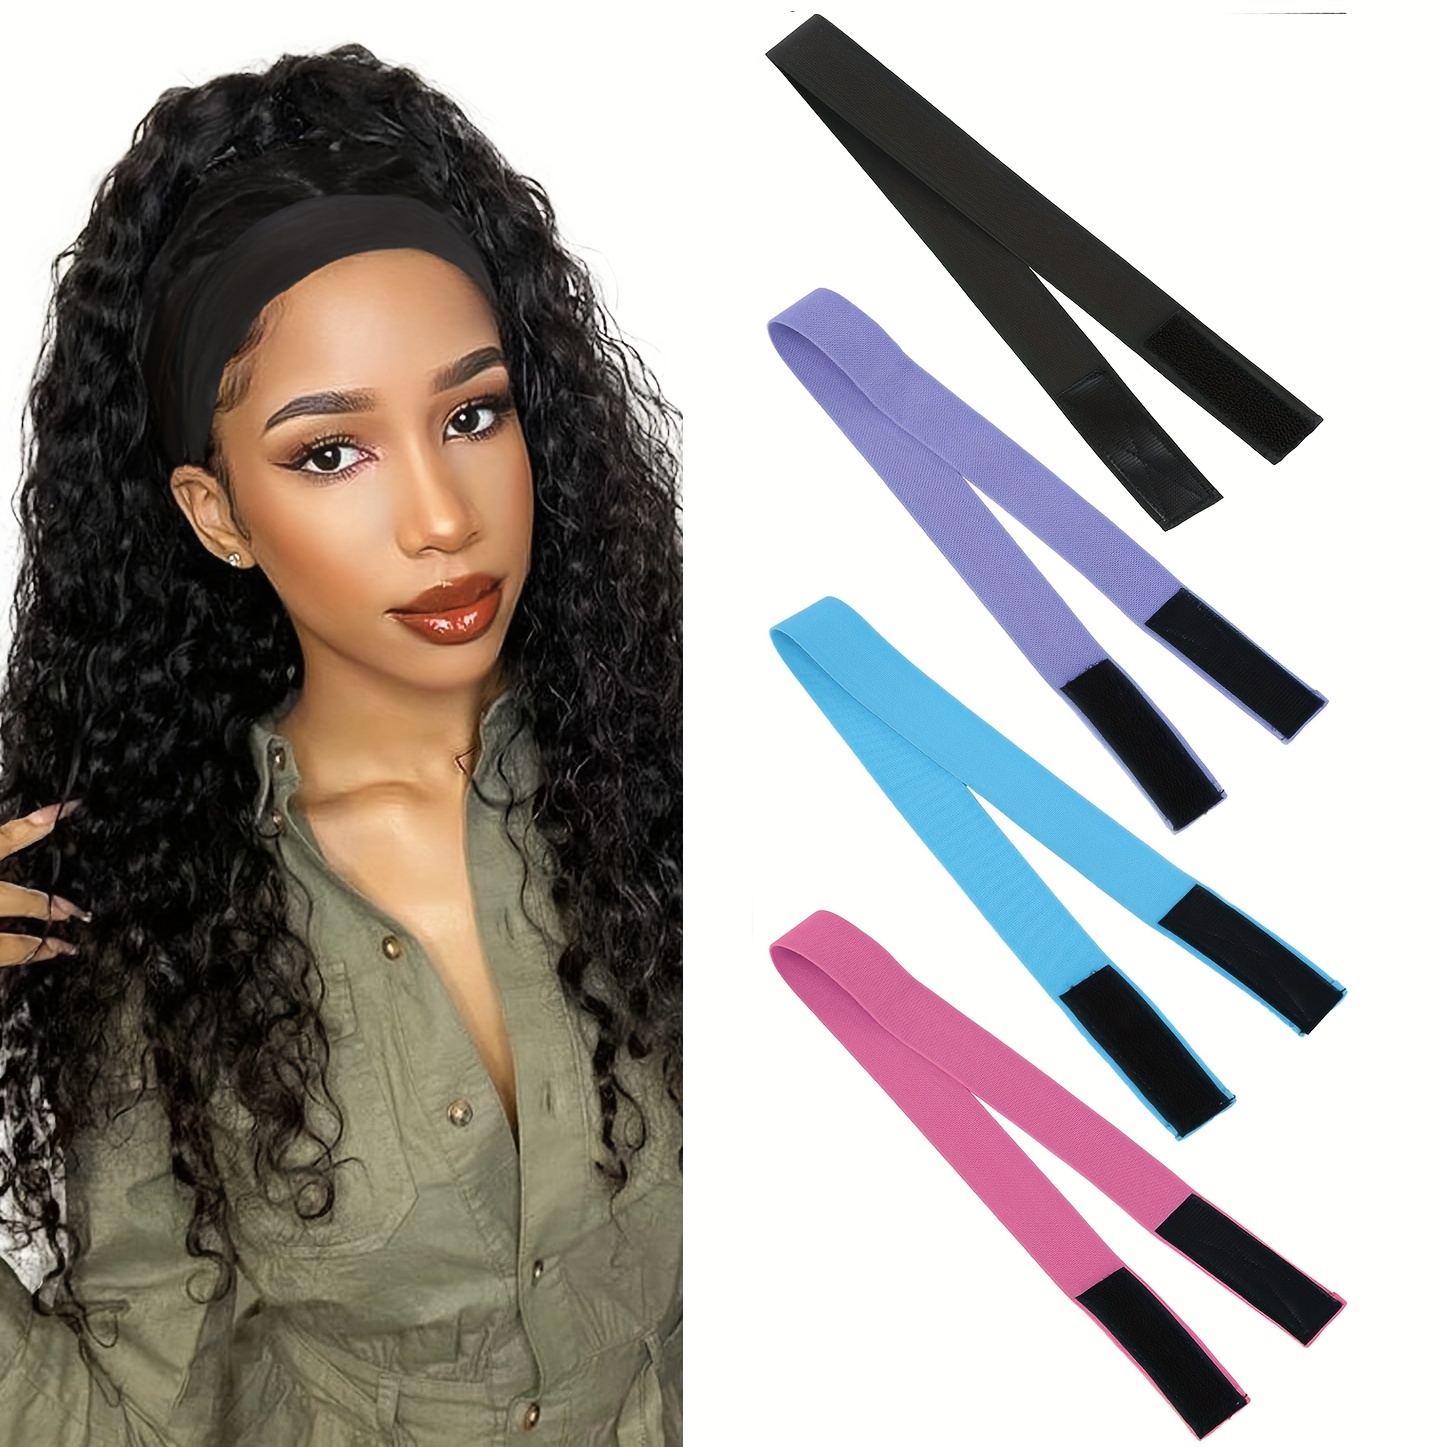 Temu Elastic Bands for Wig, Toupee, Hairpiece Edges Adjustable Lace Melting Band for Wigs Edge Wrap to Lay Edges Non Slip Thick Comfortable Durable Wig